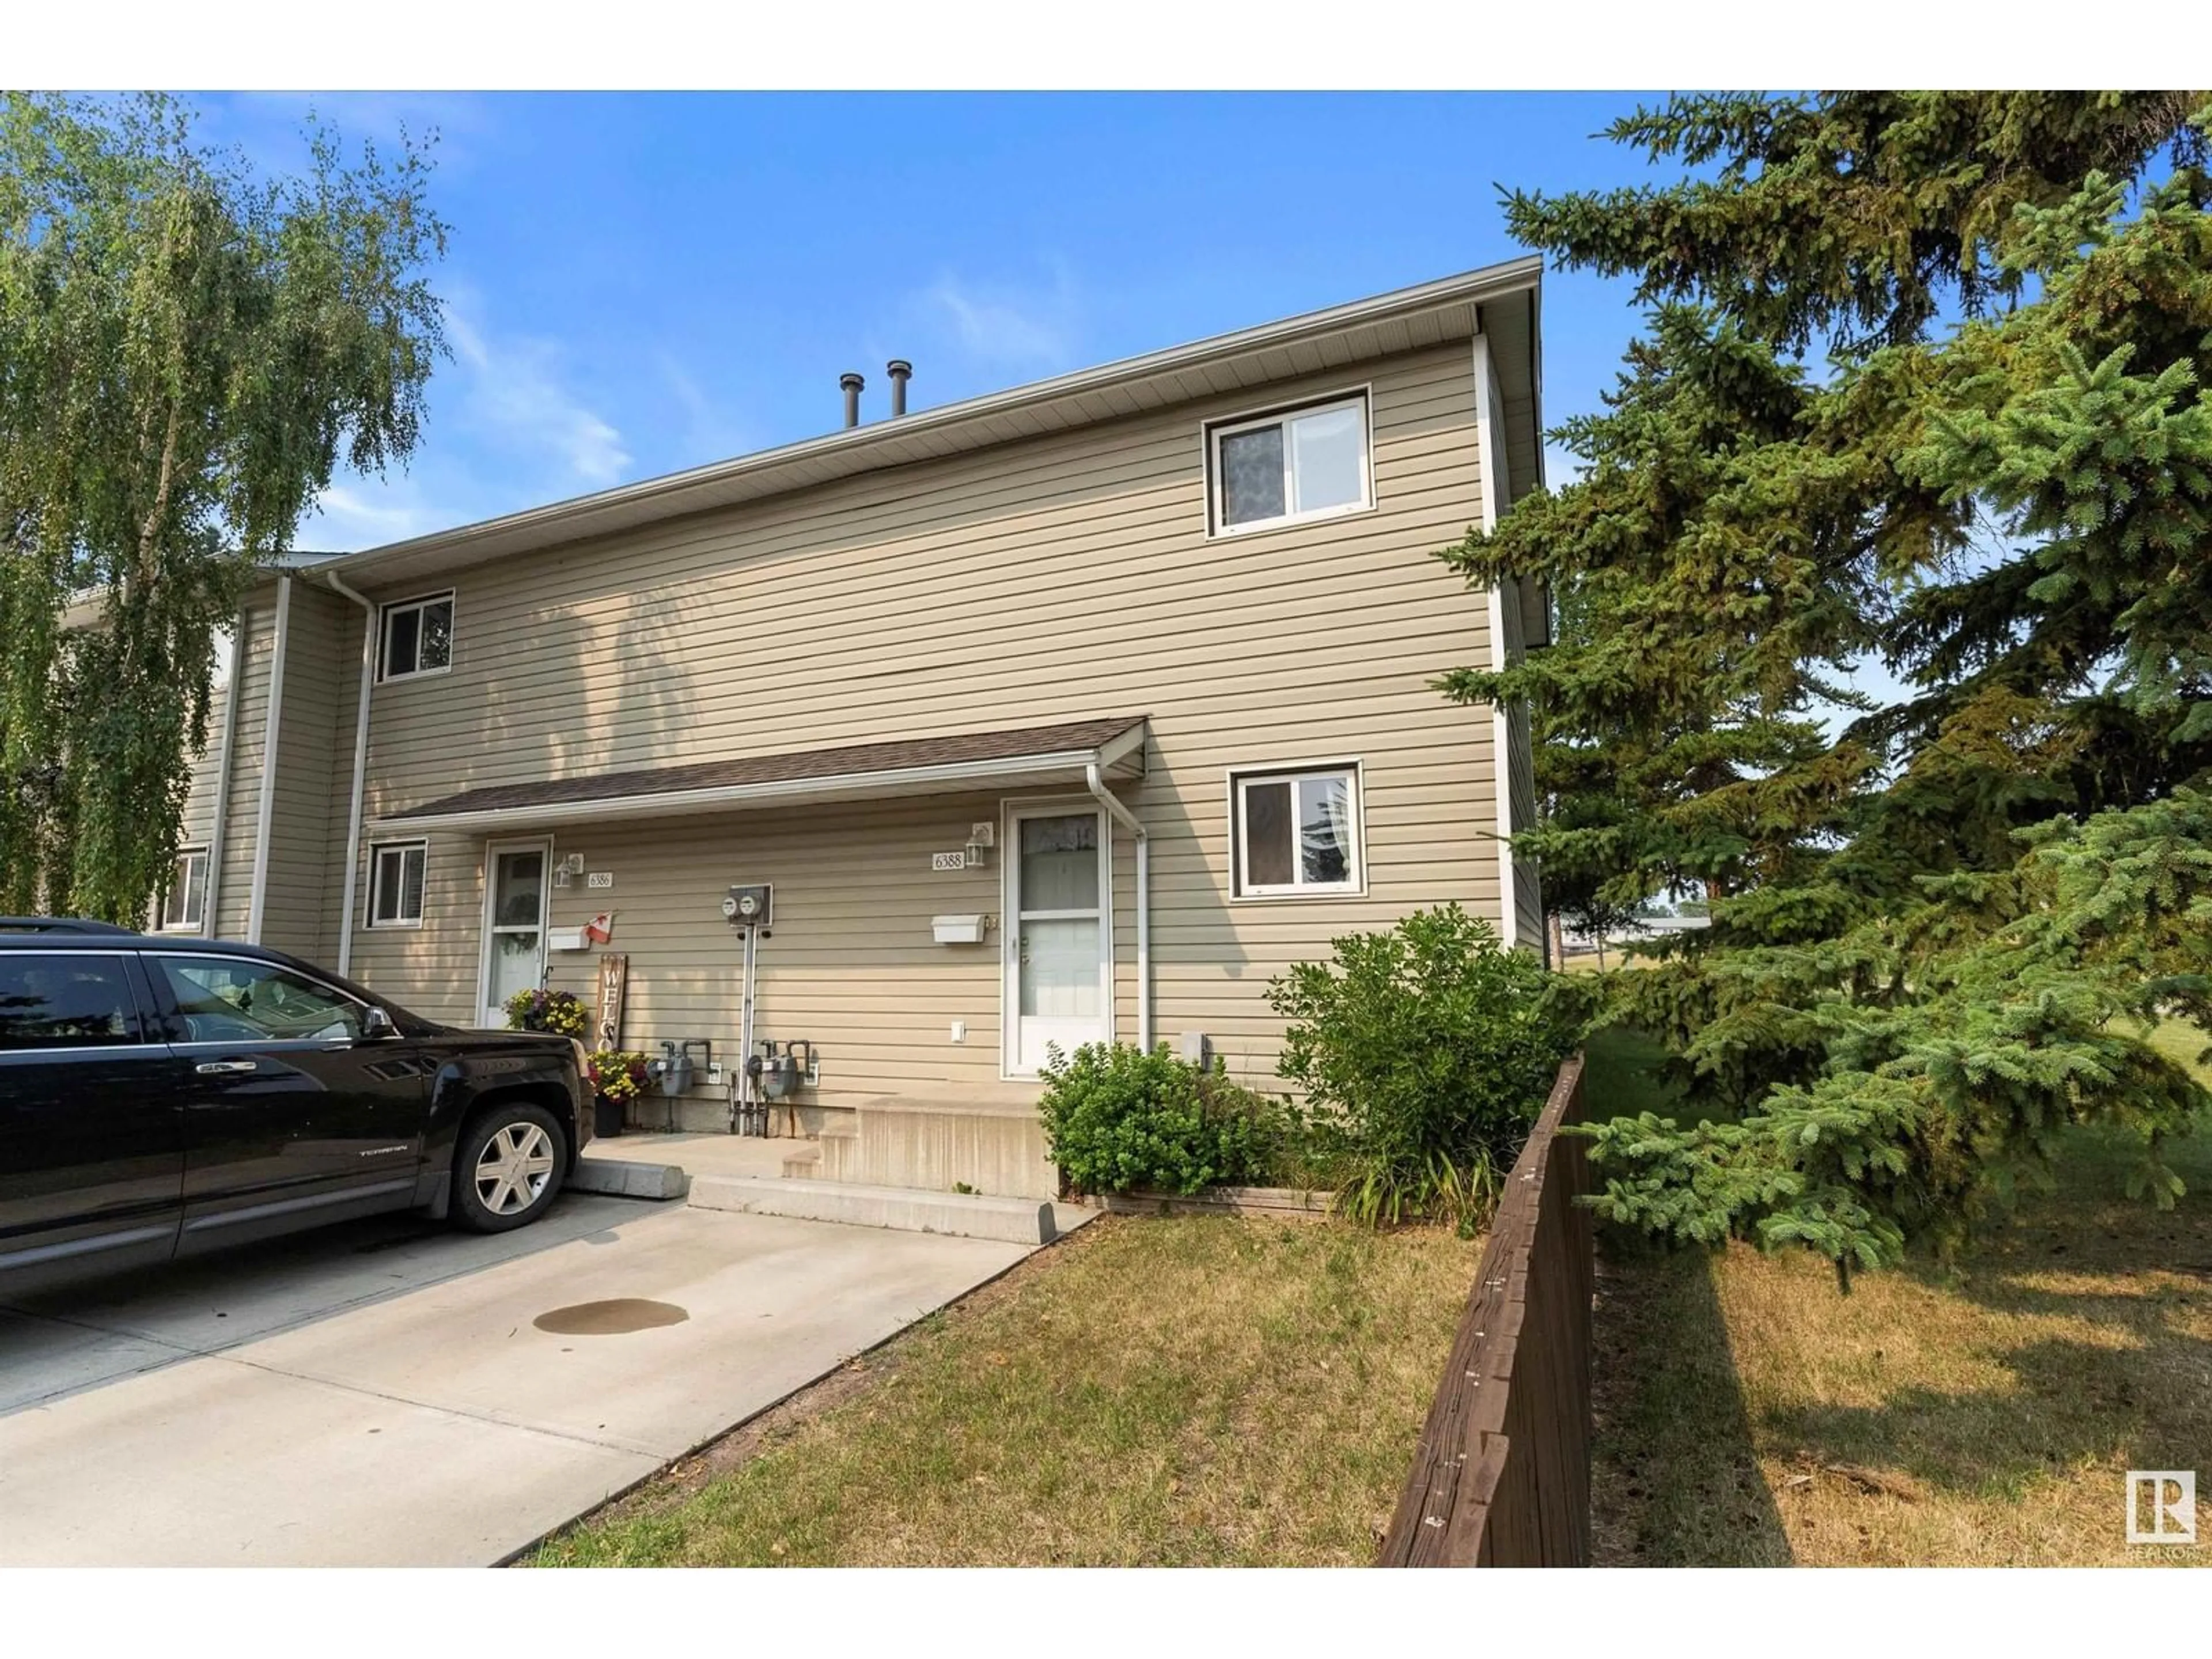 A pic from exterior of the house or condo for 6388 180 ST NW, Edmonton Alberta T5T2J6